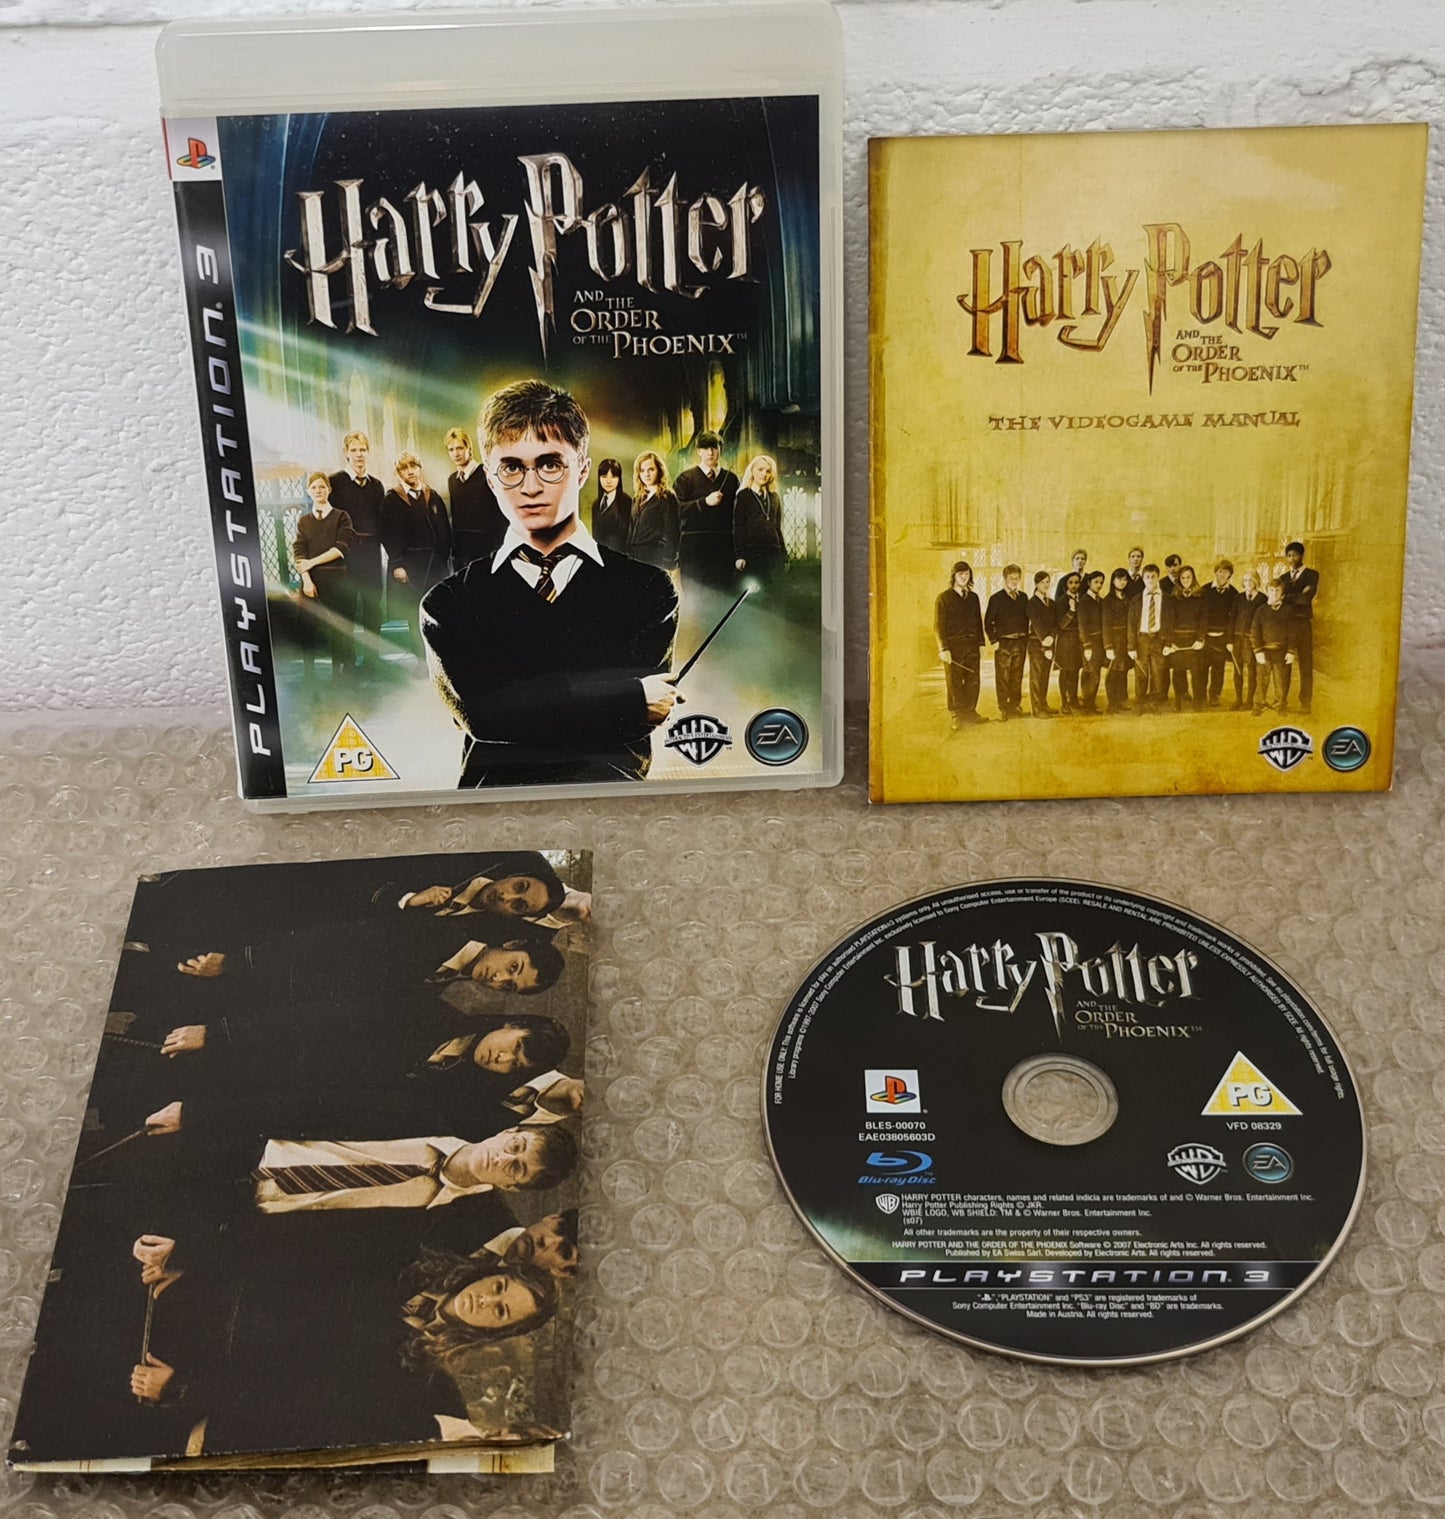 Harry Potter and the Order of the Phoenix with Map Sony Playstation 3 (PS3) Game